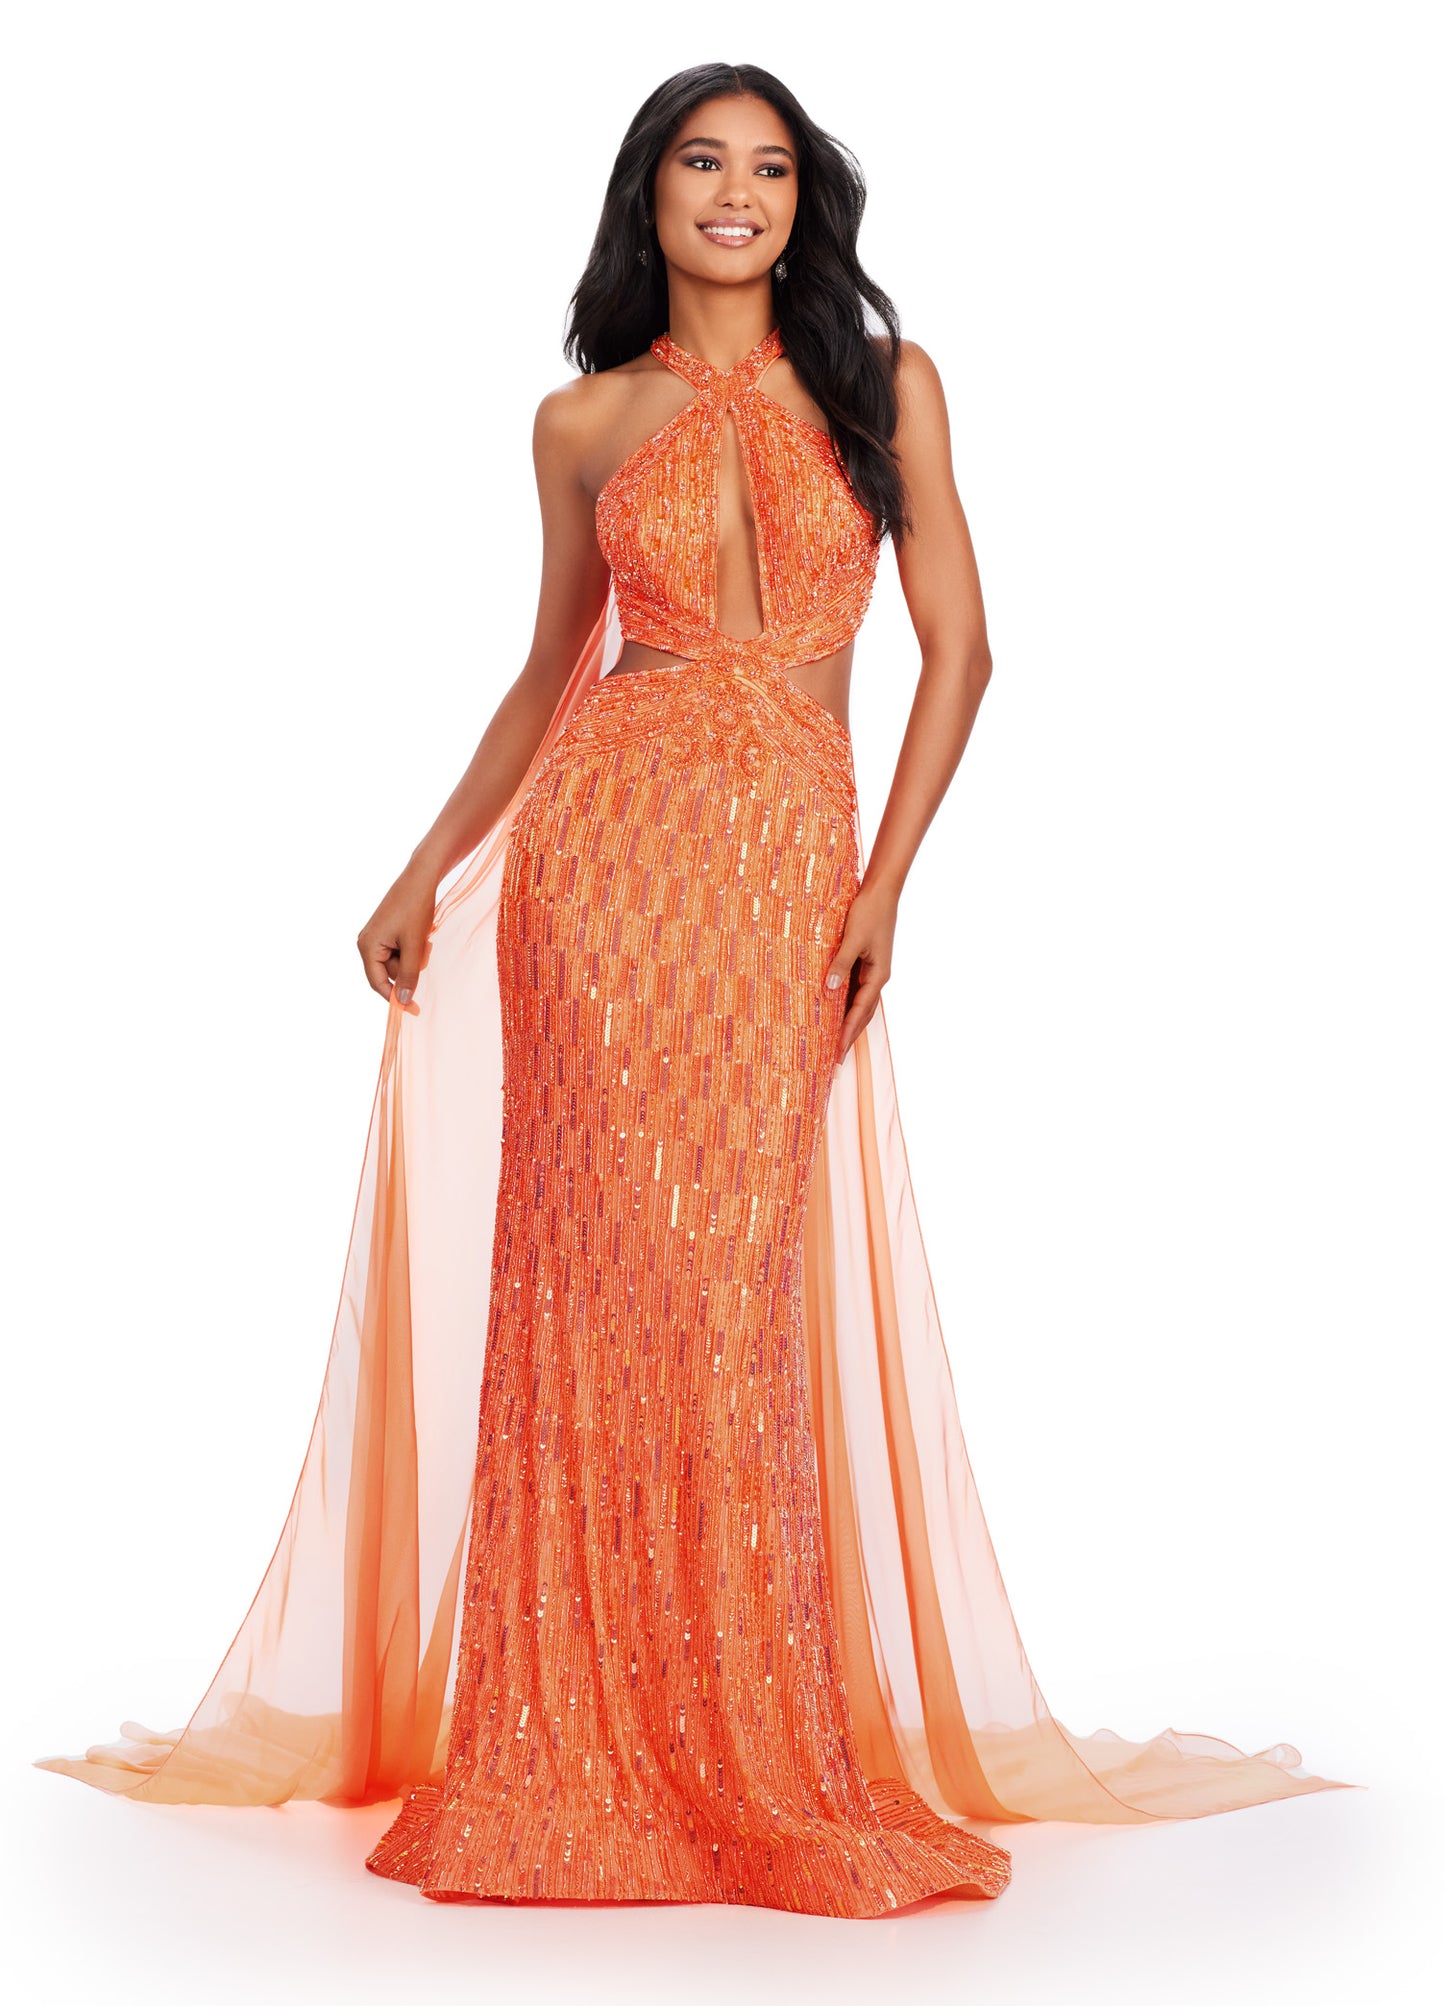 This Ashley Lauren 11499 long prom dress features beautiful beadwork and cut outs, as well as a stunning cape and halter design. Perfect for formal events and pageants, this gown will make you stand out with its elegant and glamorous style. Ready to hit the runway? This fully beaded halter neck gown features cut outs and chiffon capes to ensure you'll make an entrance.